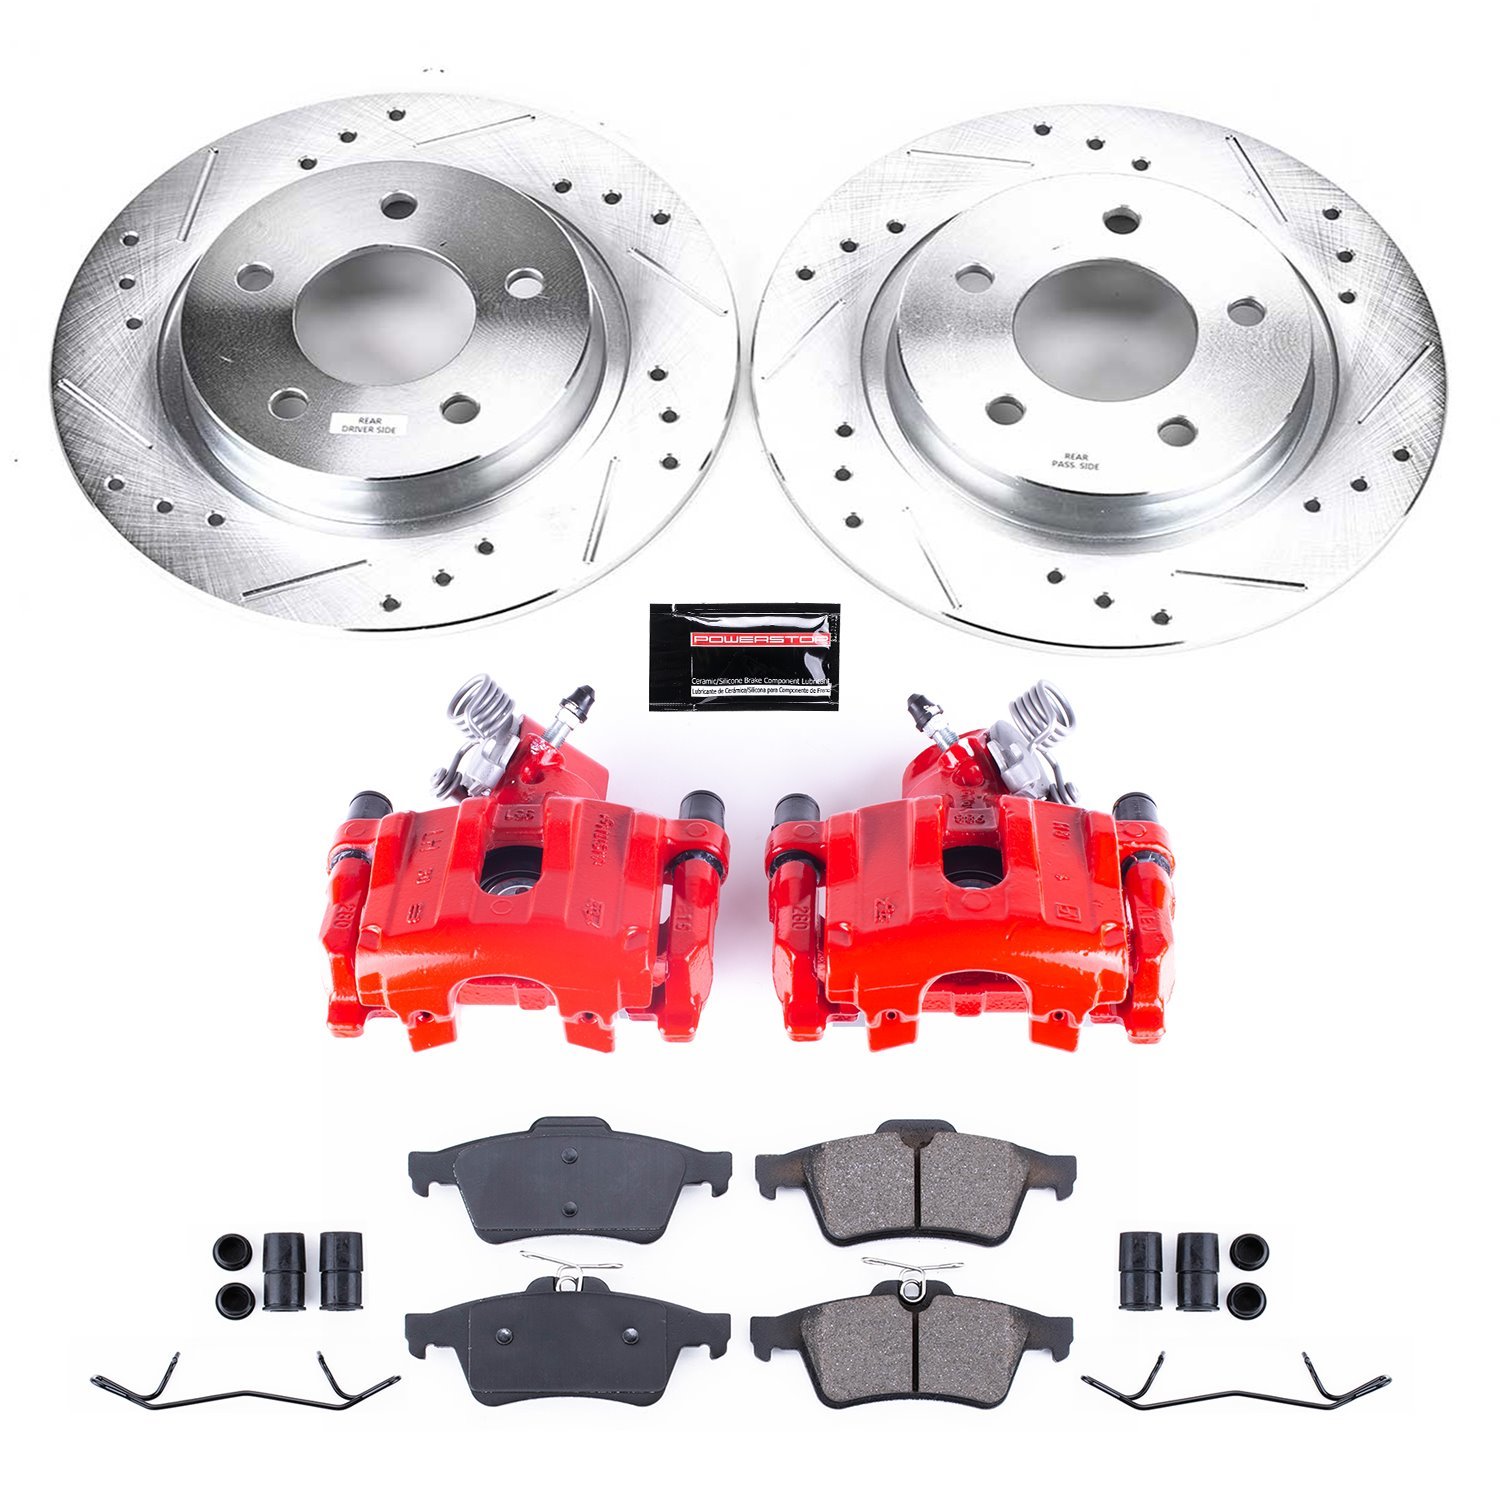 Z23 Evolution Sport Rear Brake Upgrade Kit with Red Powder-Coated Calipers Fits 2004-2013 Mazda 3